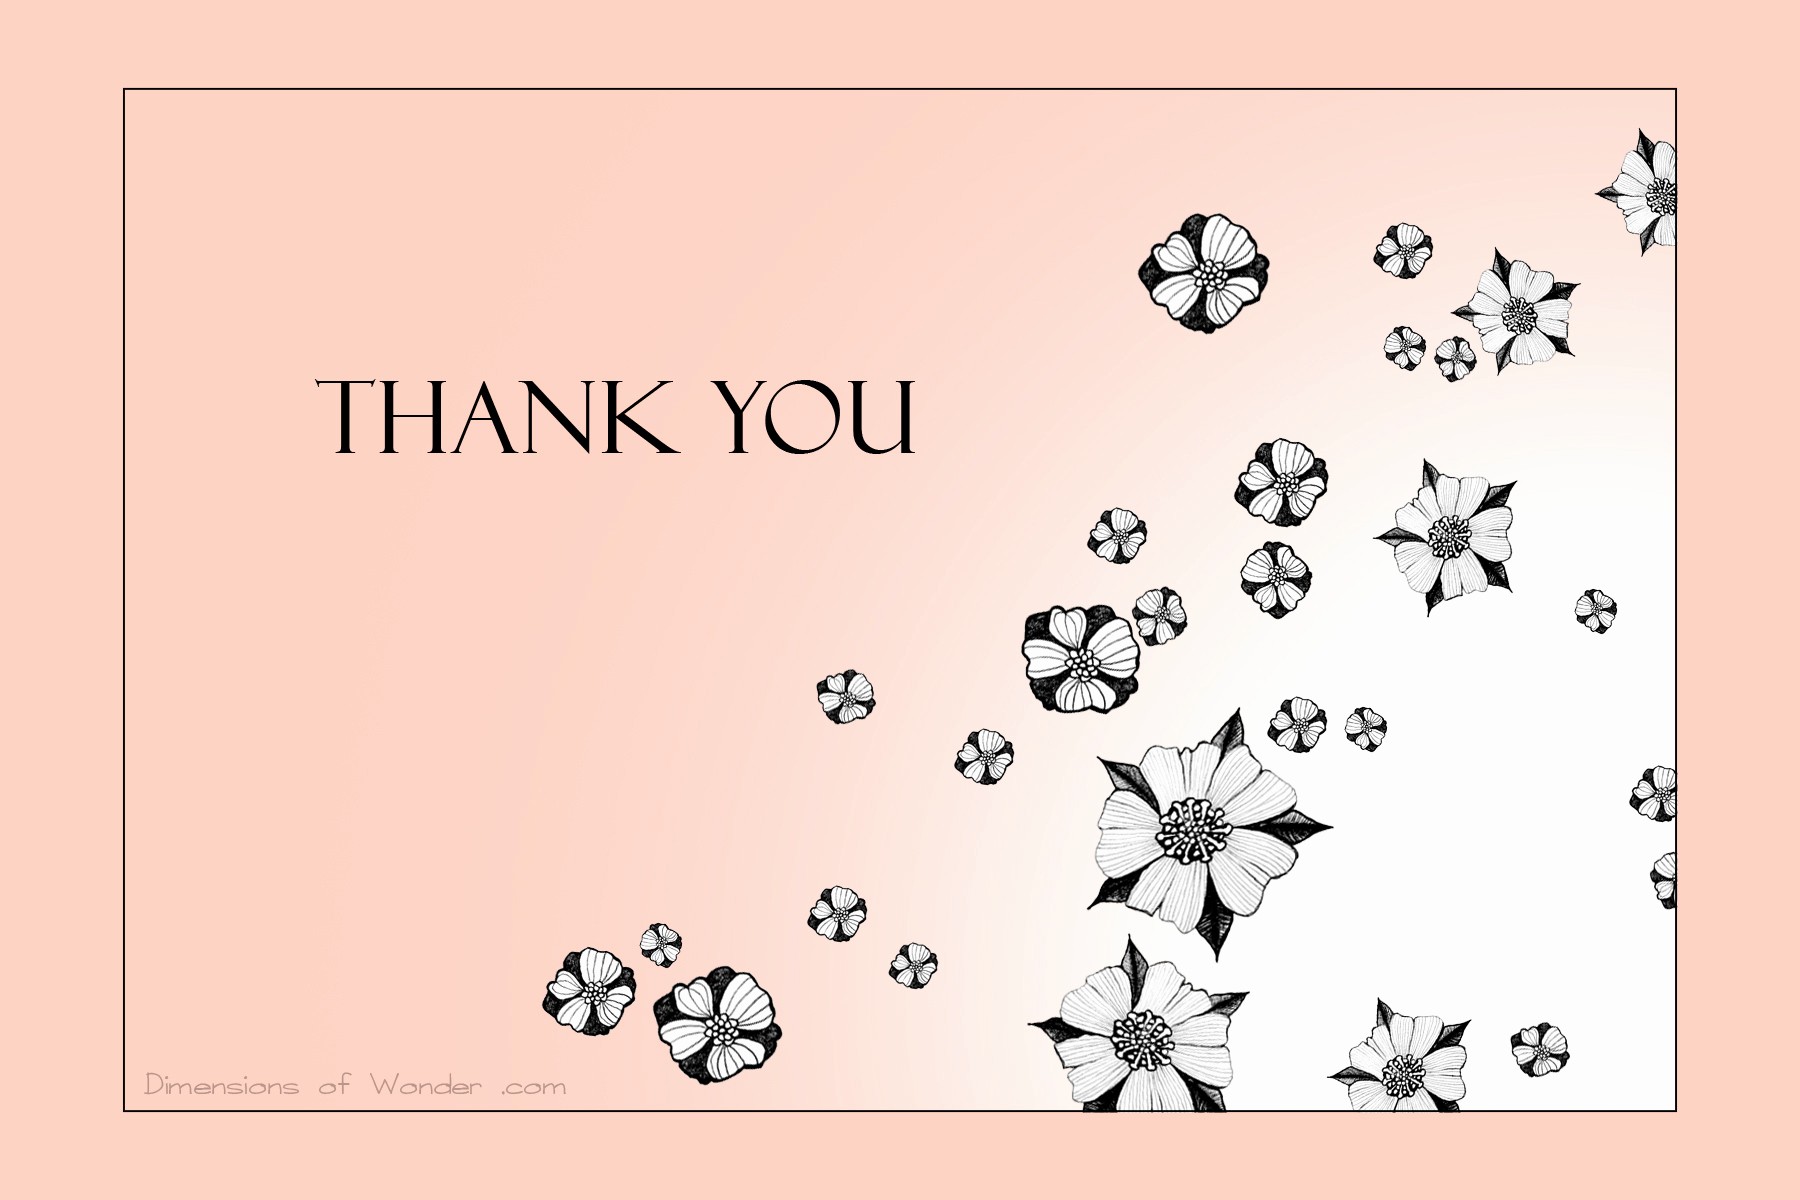 Words for Thank You Card Inspirational Thank You Card Template for Word Portablegasgrillweber